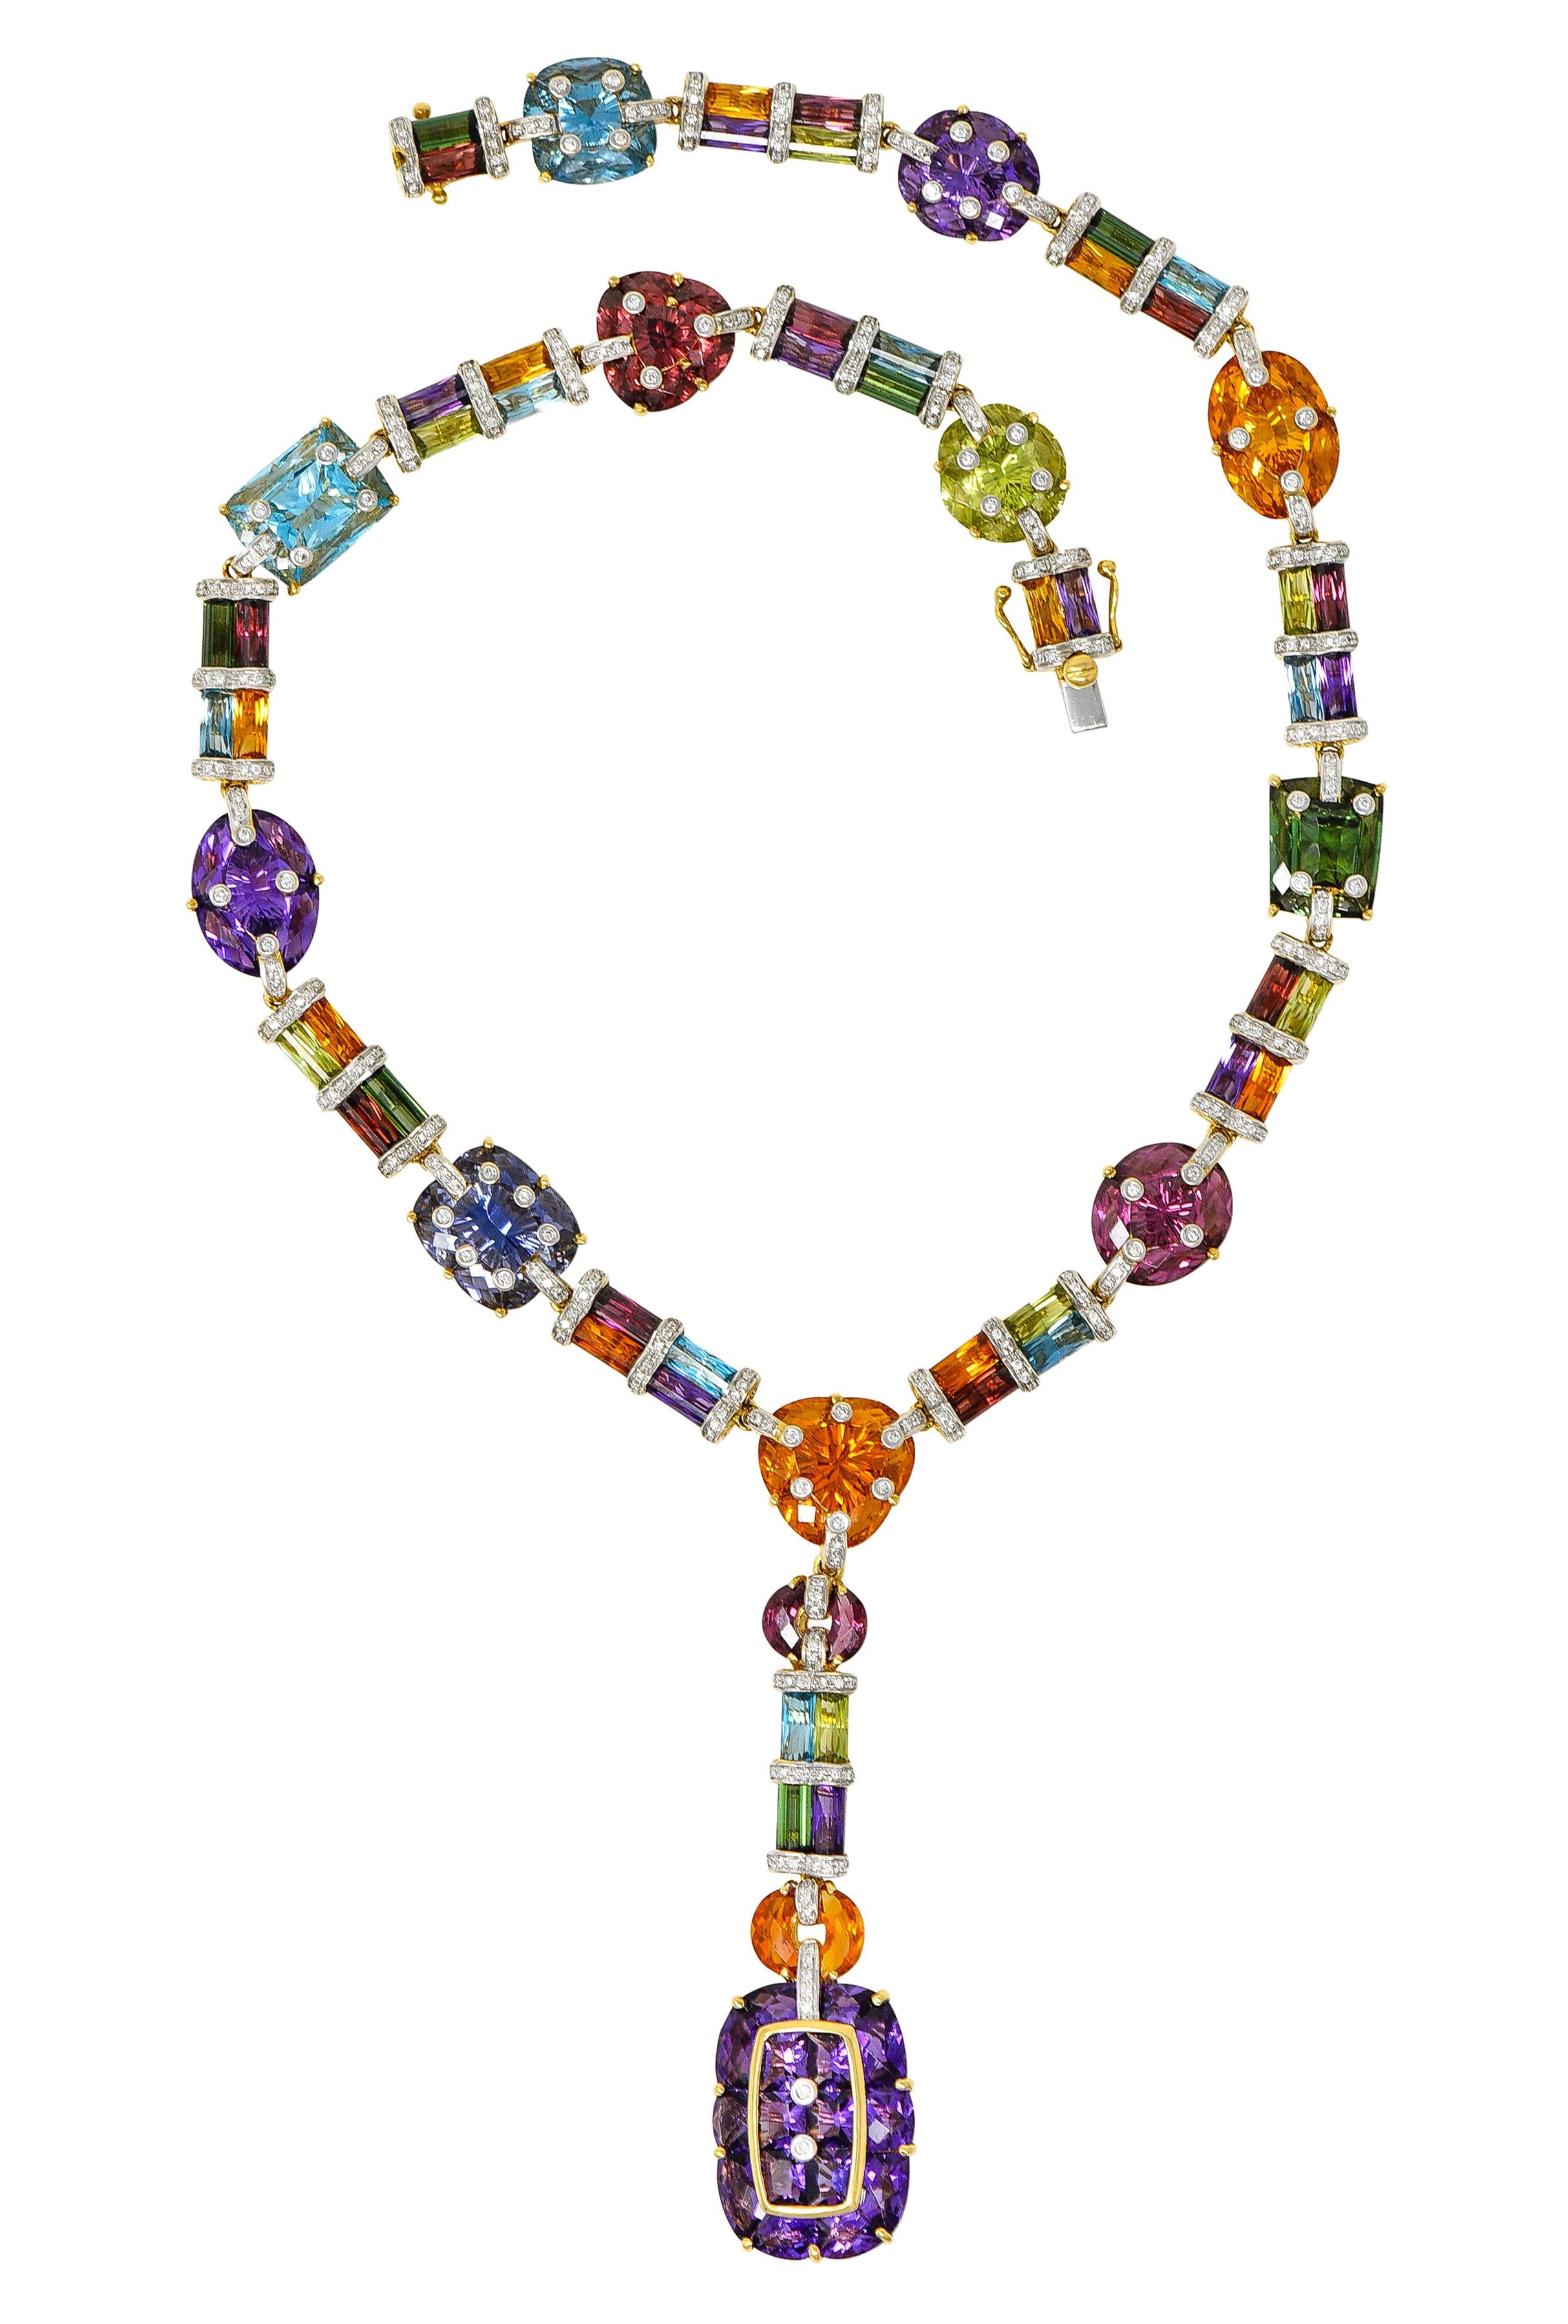 Yellow gold collar necklace is comprised of fancily cut gemstone cluster stations alternating with barrel cut gemstone spacer links. Featuring brightly colored citrine, garnet, amethyst, peridot, green tourmaline, iolite, and others. With an